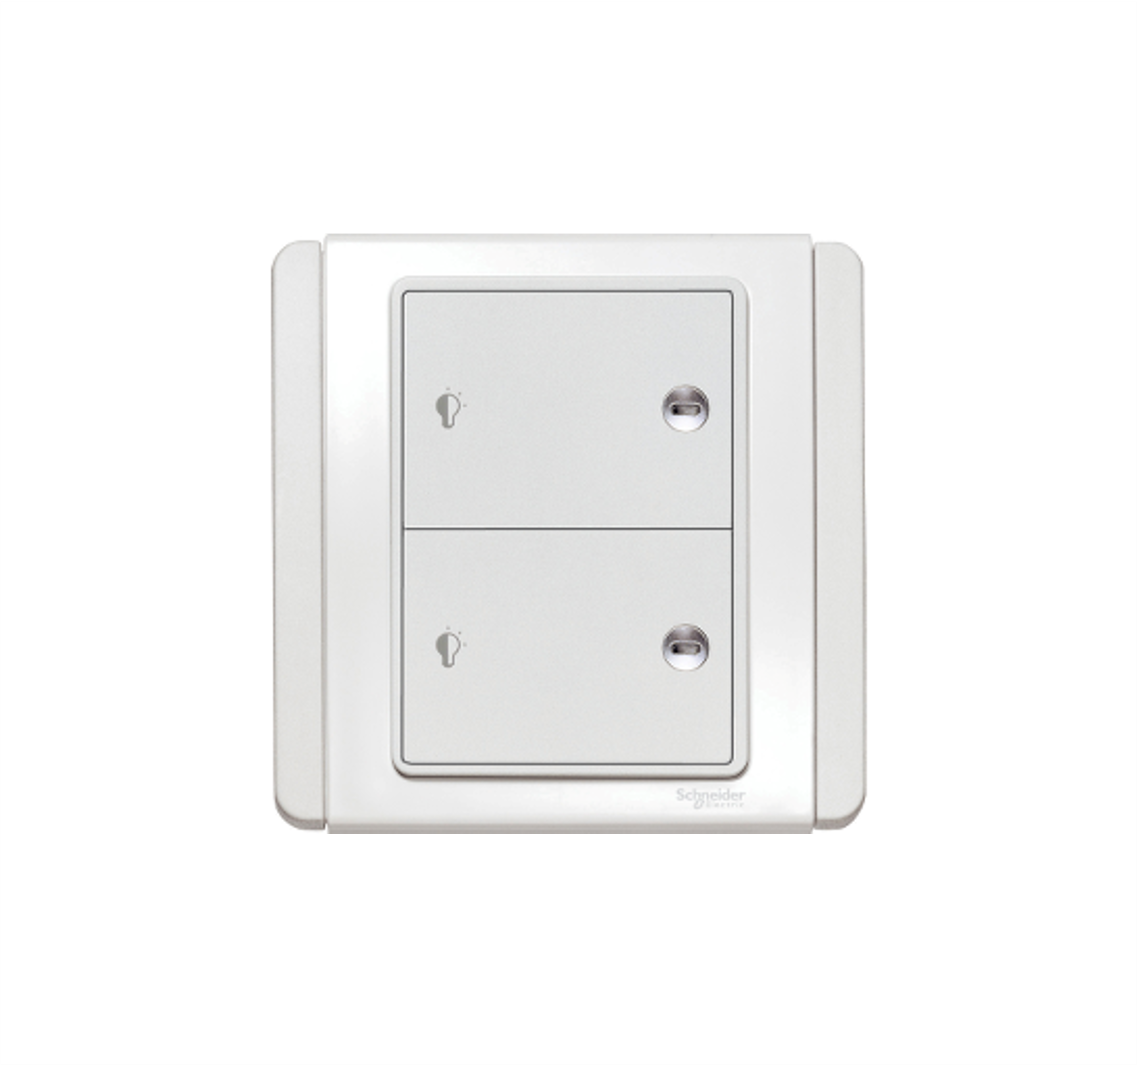 NEO - 400W 2 Gang Horizontal Dimming Switch with White LED (White)